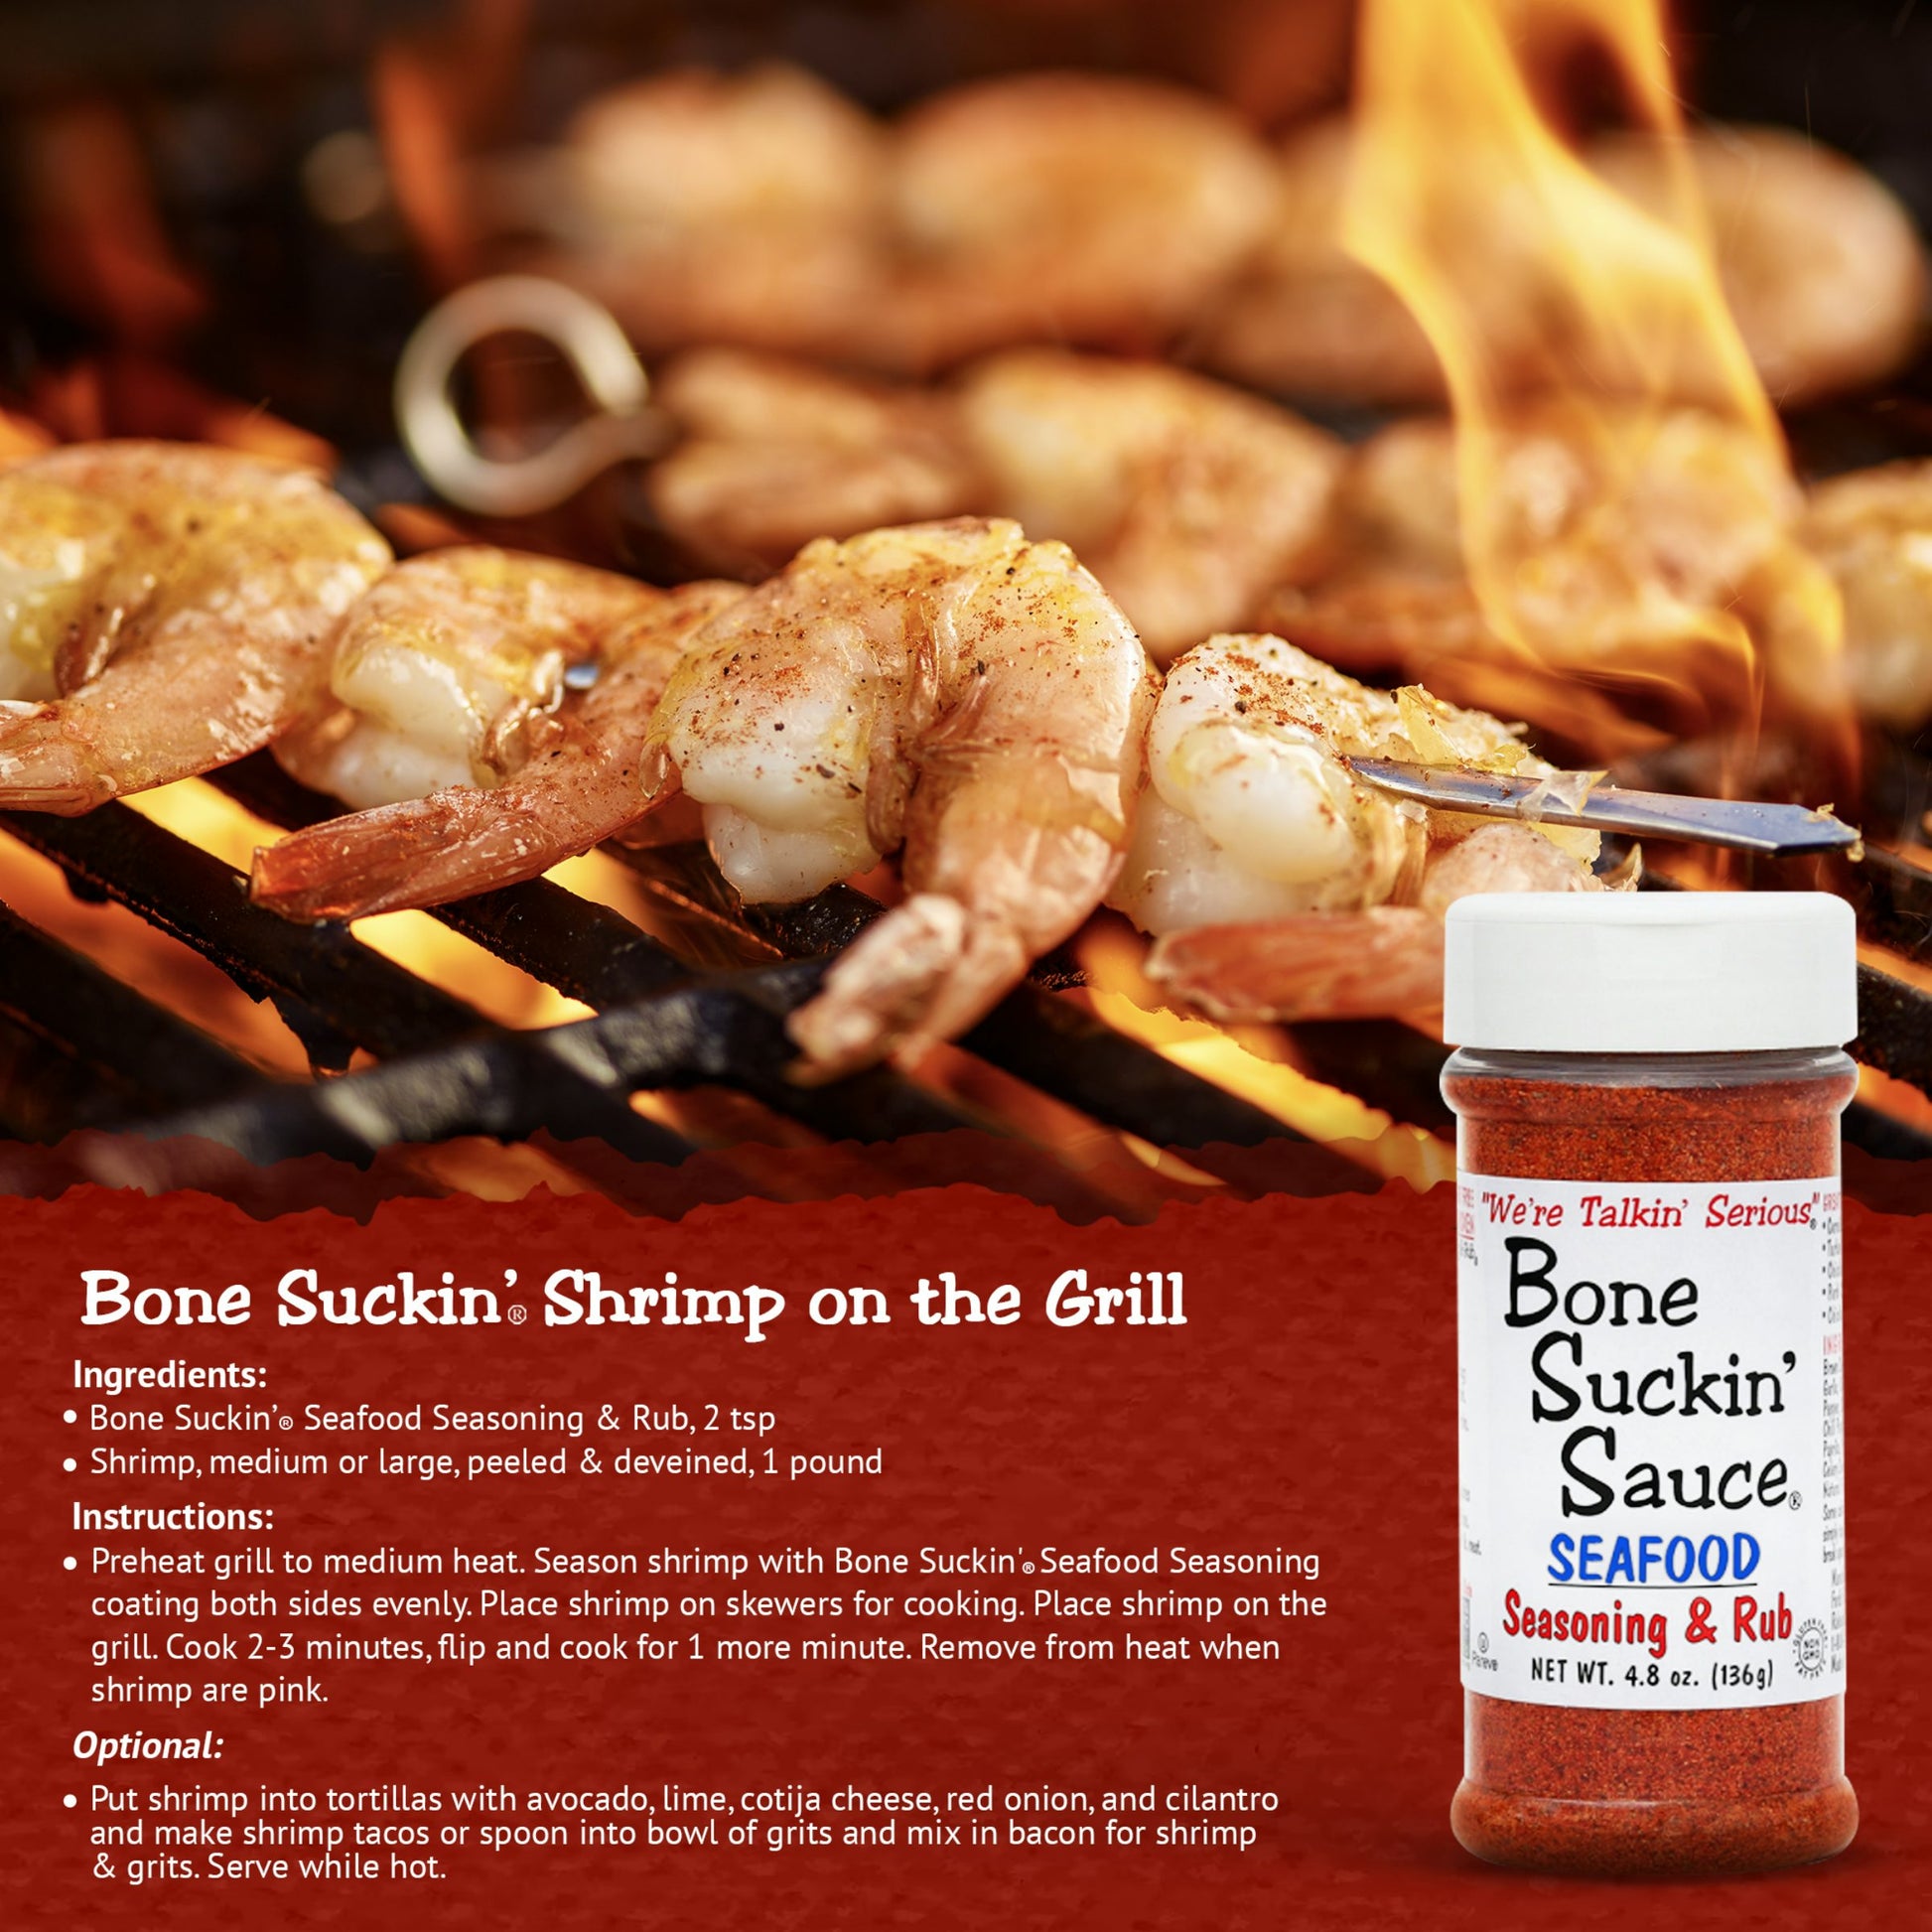 Bone Suckin Shrimp on the Grill Recipe. Ingredients: Bone Suckin Seafood Seasoning, 2 tsp. Shrimp, medium or large, peeled and deveined, 1 pound. Instructions: Preheat grill to medium heat. Season shrimp with Bone Suckin Seafood Seasoning coating both sides evenly. Place shrimp on skewers for cooking. Place shrimp on the grill. Cook 2-3 minutes, flip and cook for 1 more minute. Remove from heat when shrimp are pink.